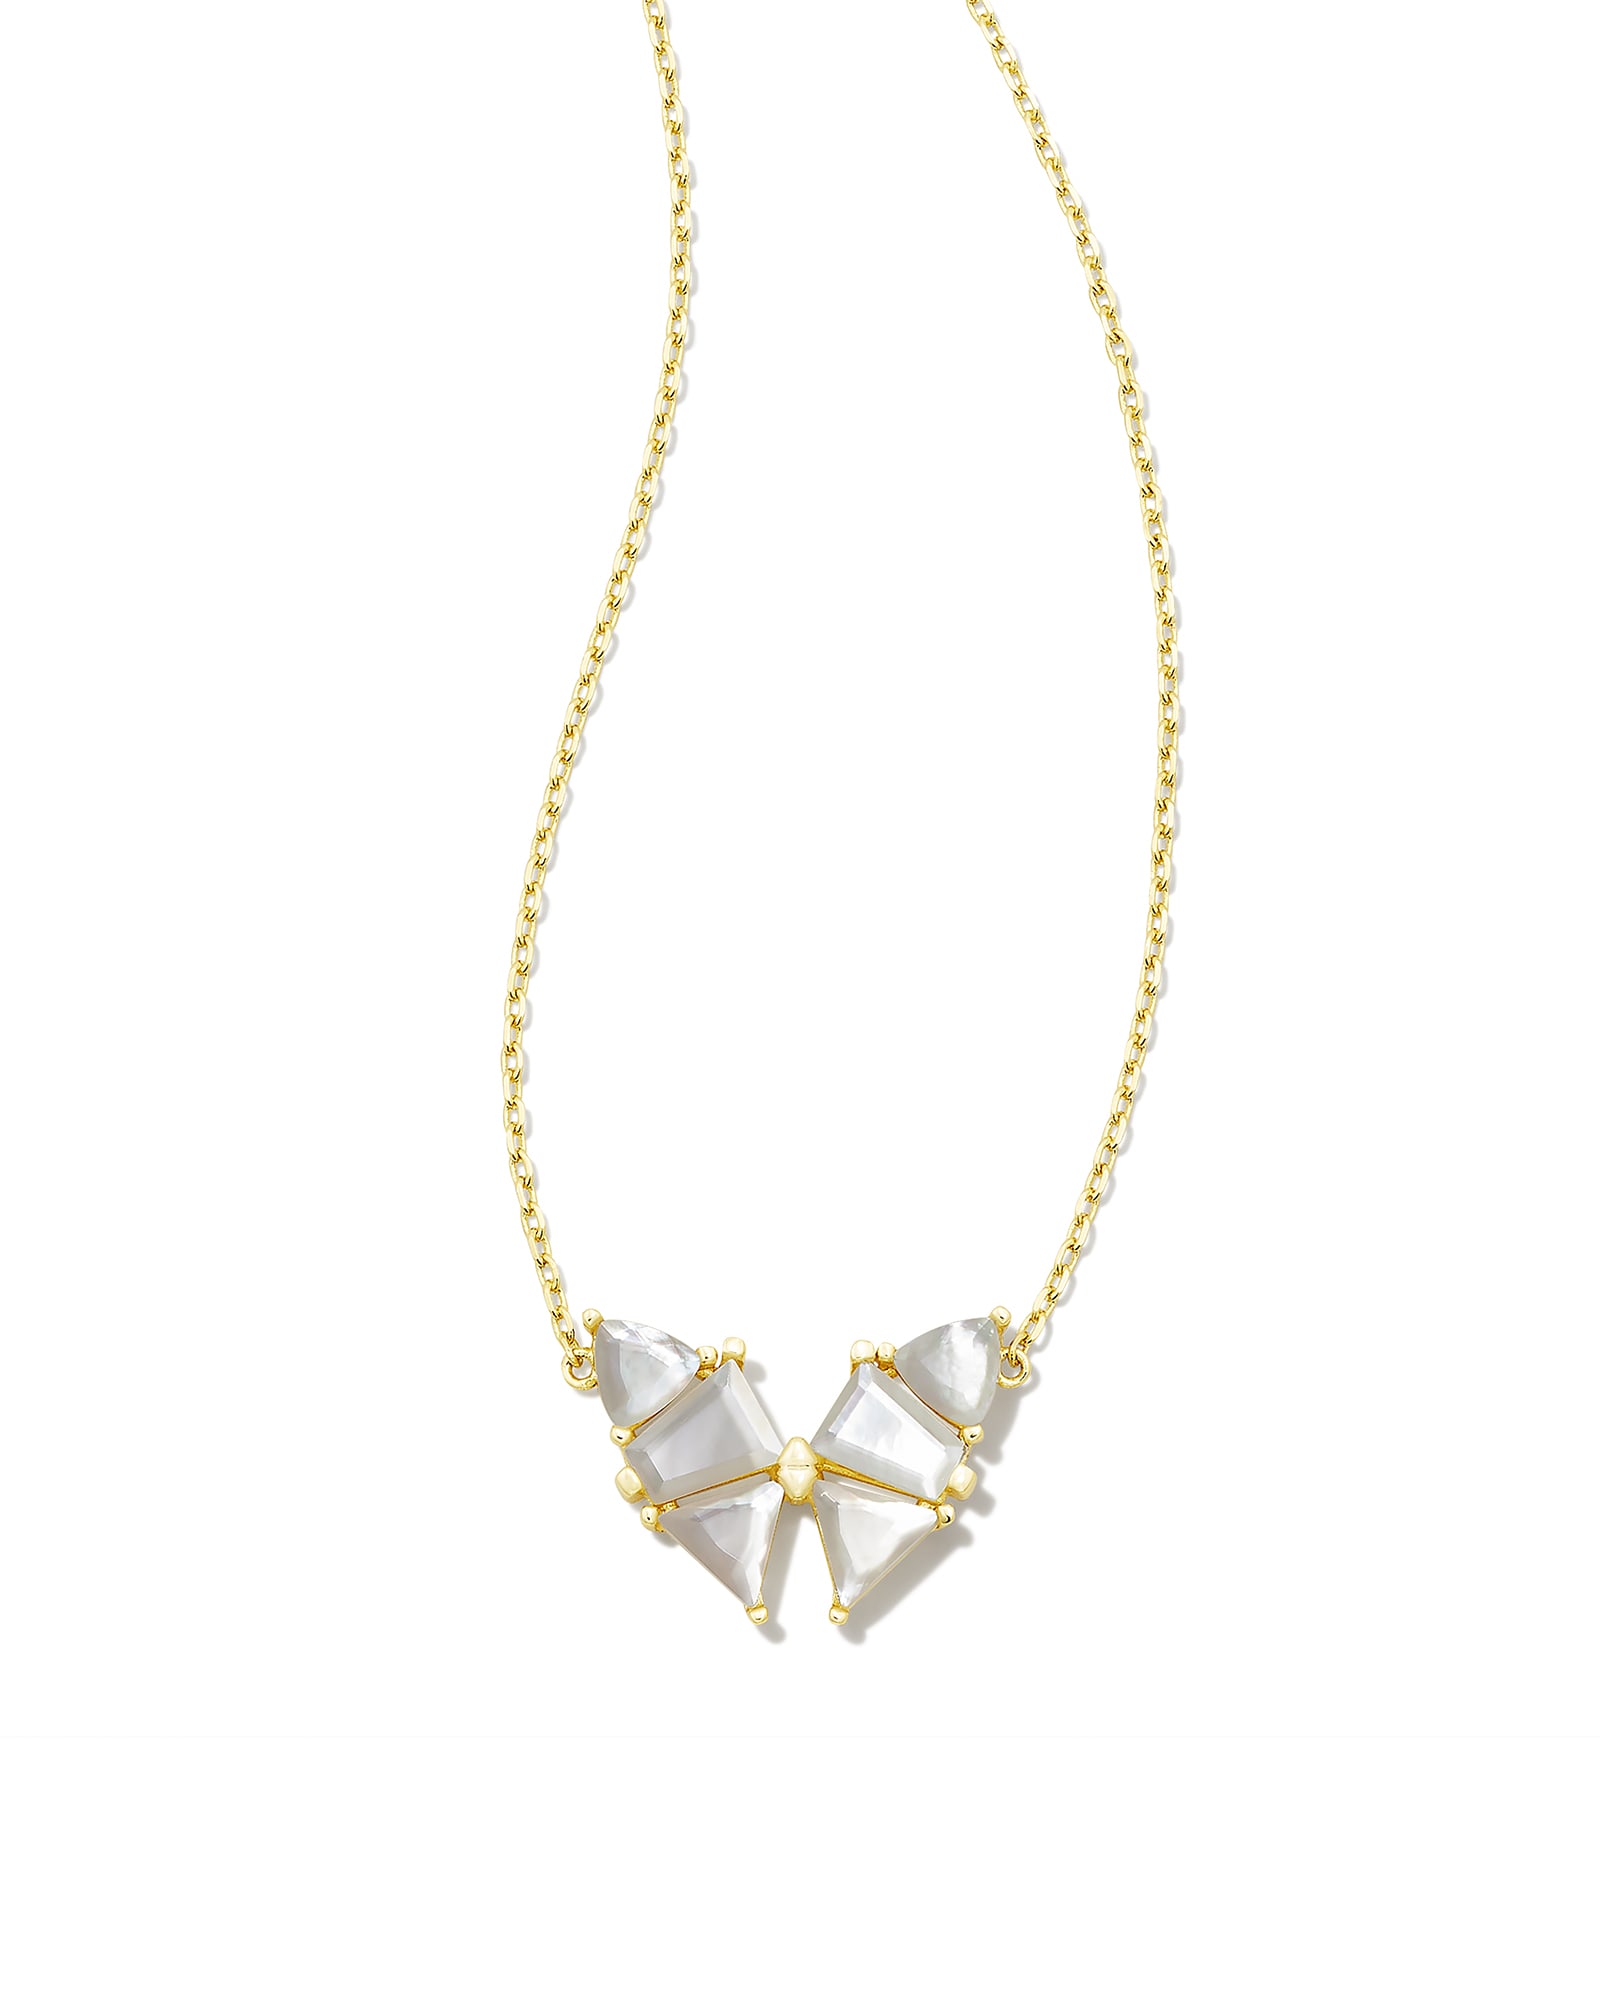 Blair Gold Butterfly Pendant Necklace in Ivory Mother-of-Pearl | Kendra Scott